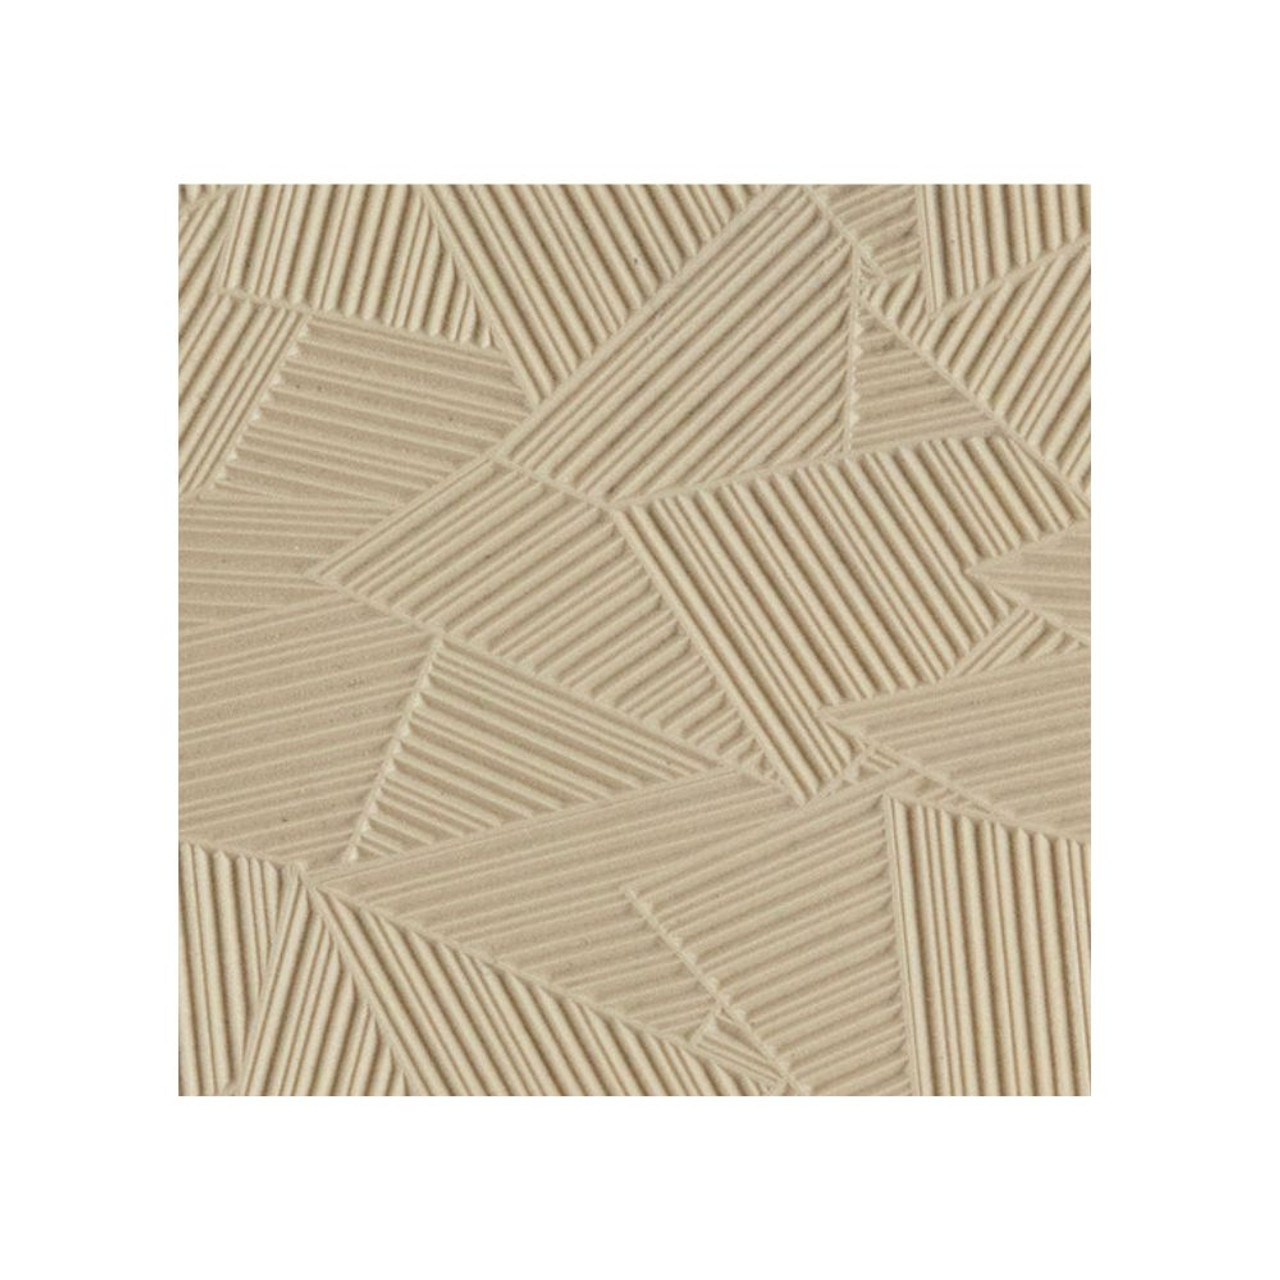 Texture Tile - Origami 